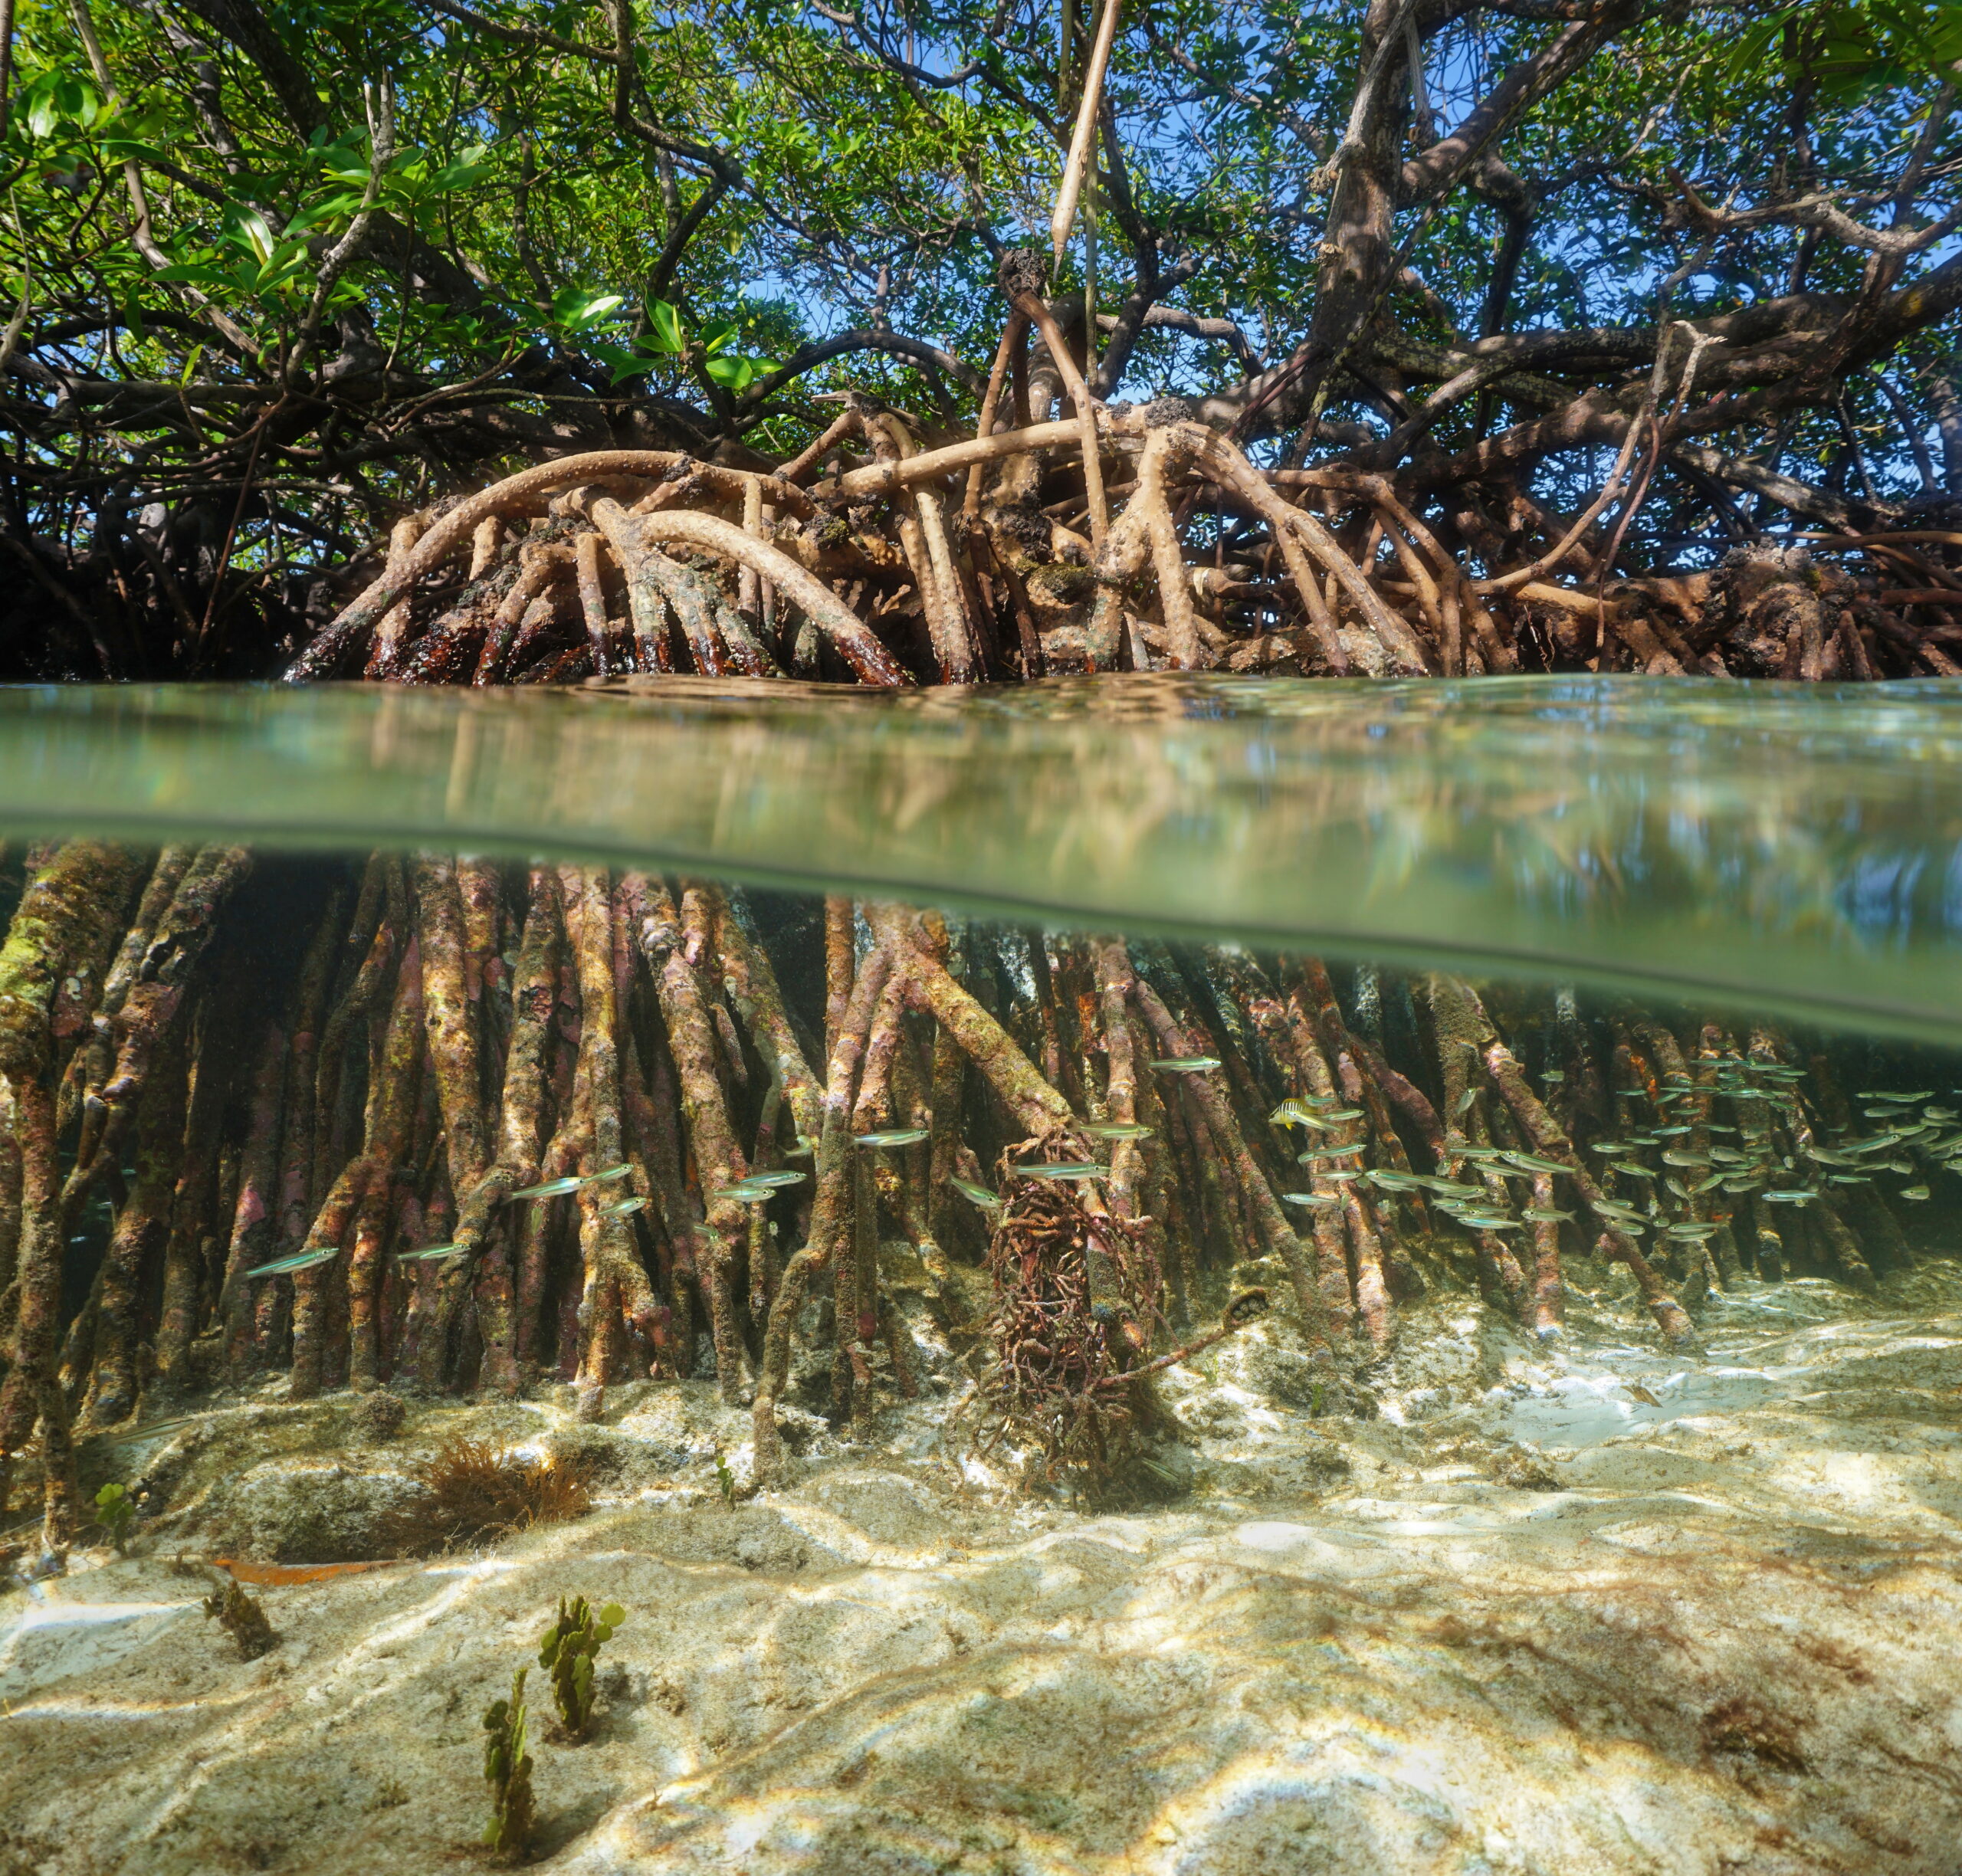 The Crucial Role of Mangroves in Coastal Protection